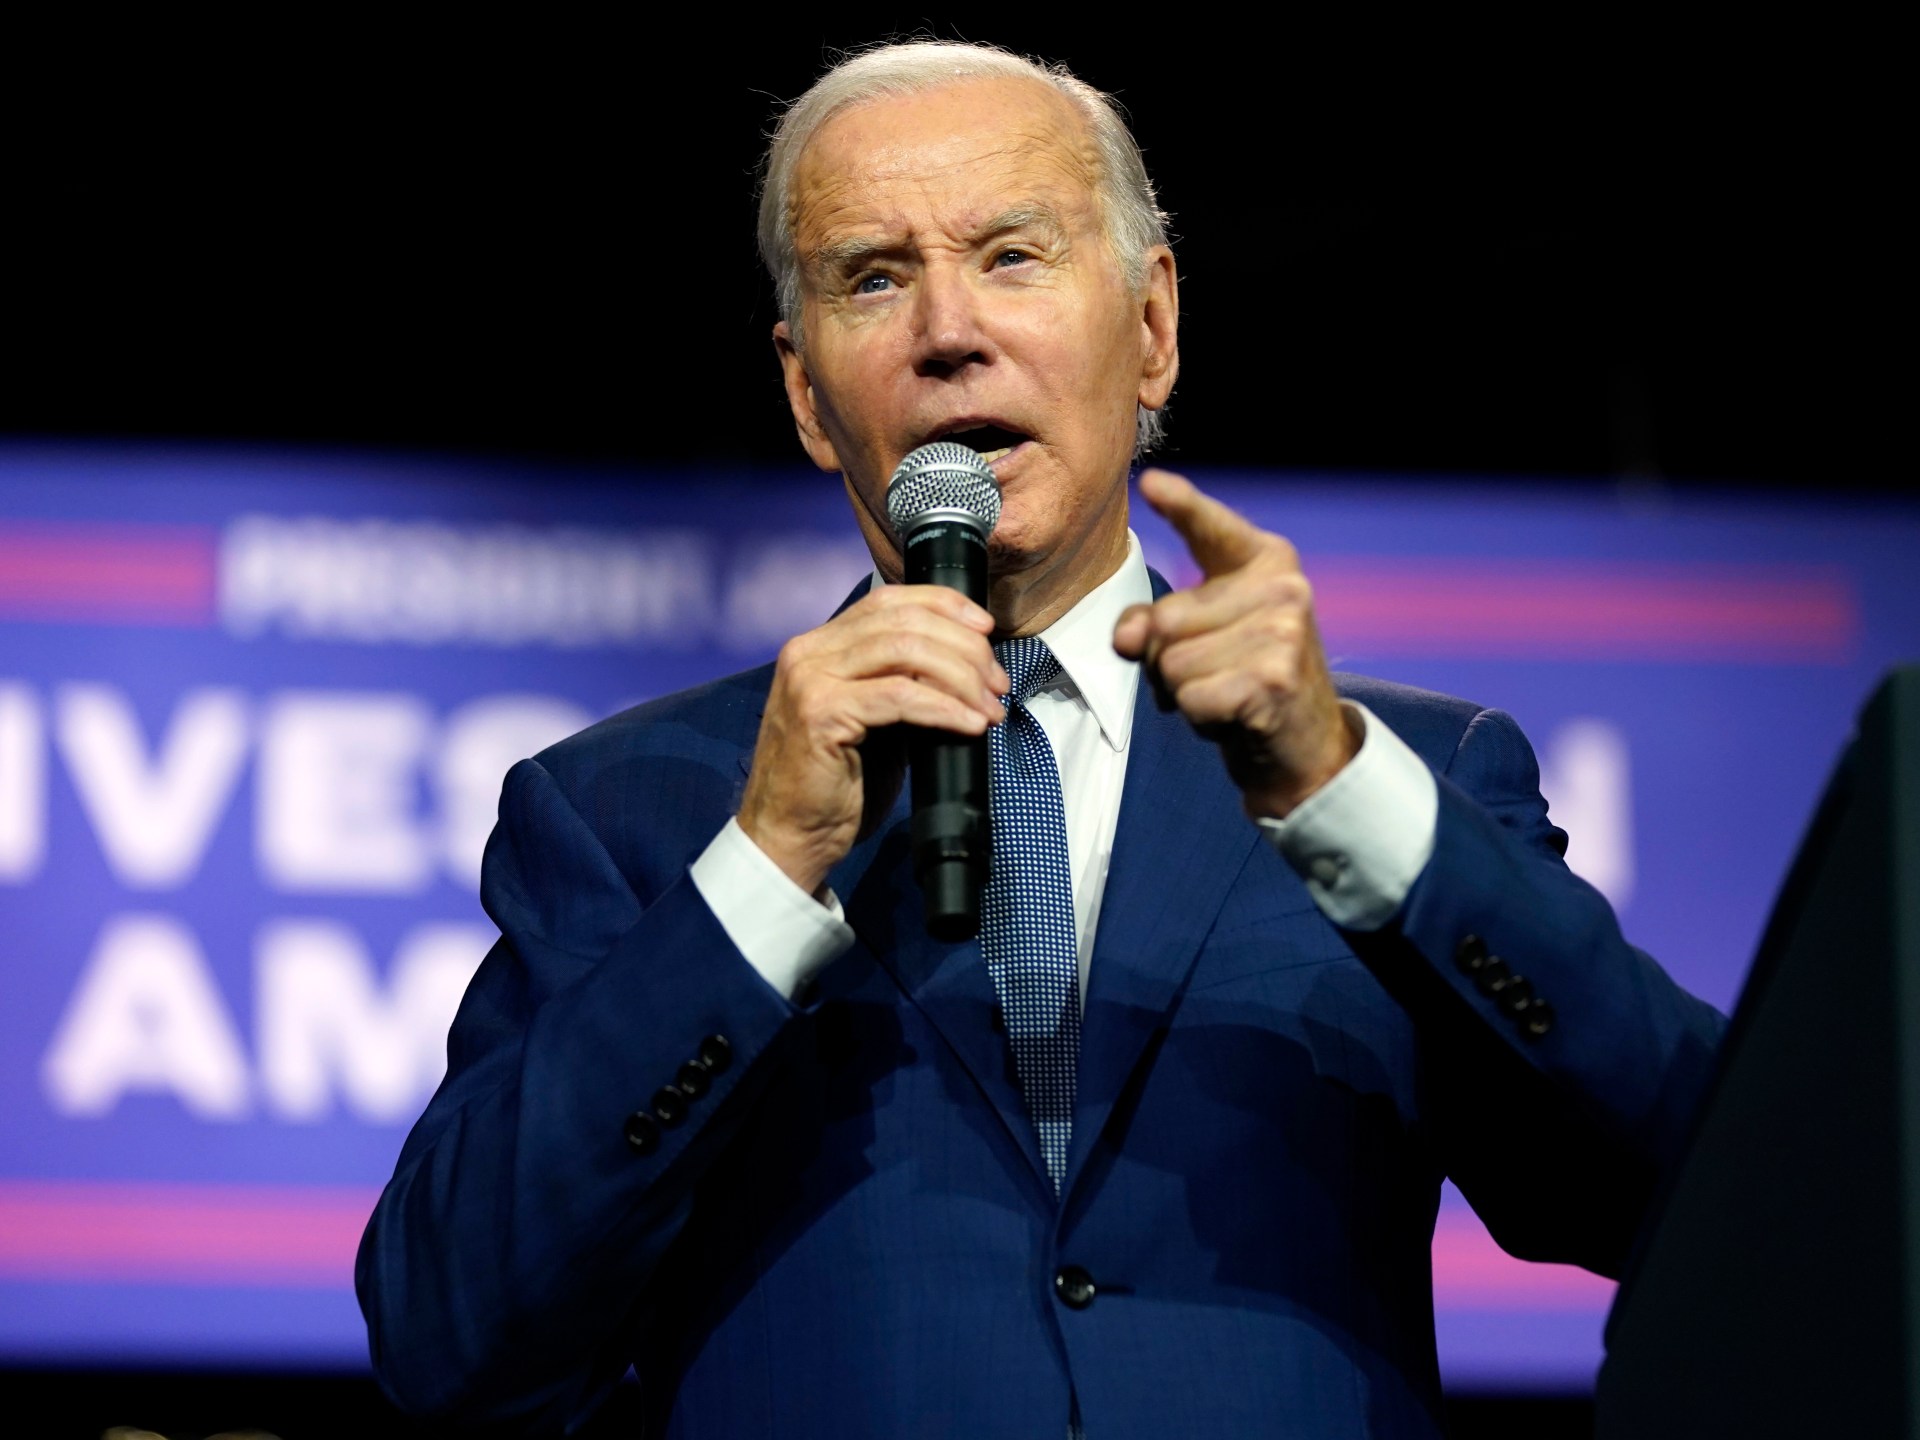 Biden warns of recession unless the GOP agrees to raise the debt ceiling